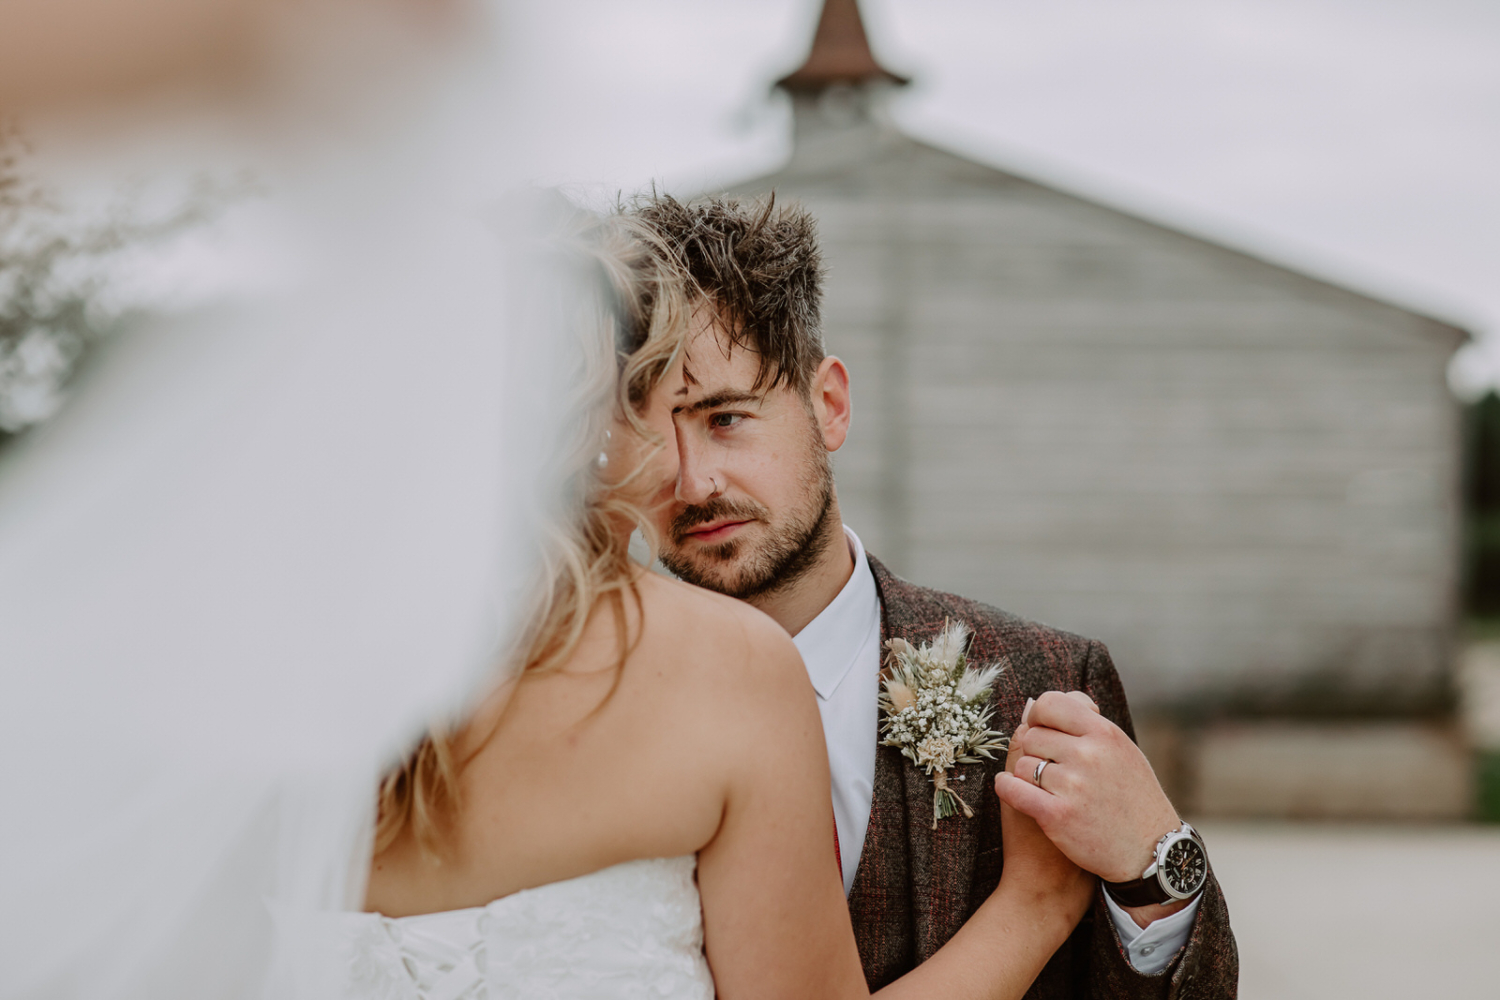 A photo capturing an intimate moment between the bride and groom as they touch their foreheads, with the bride's back facing the camera.